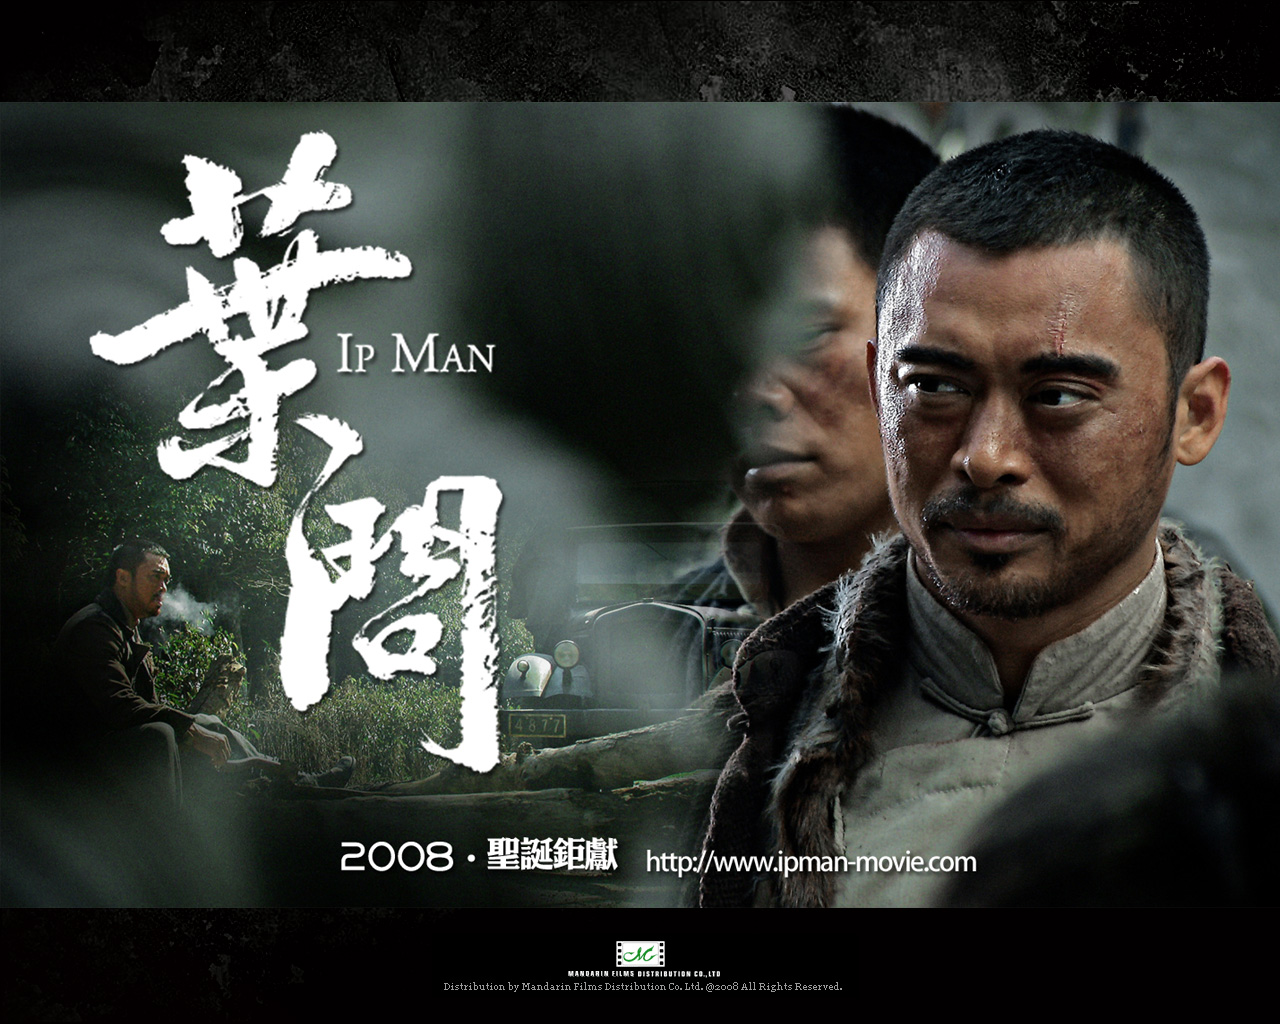 Ip Man wallpaper 04 in wallpapers album :: photos and posters in ...